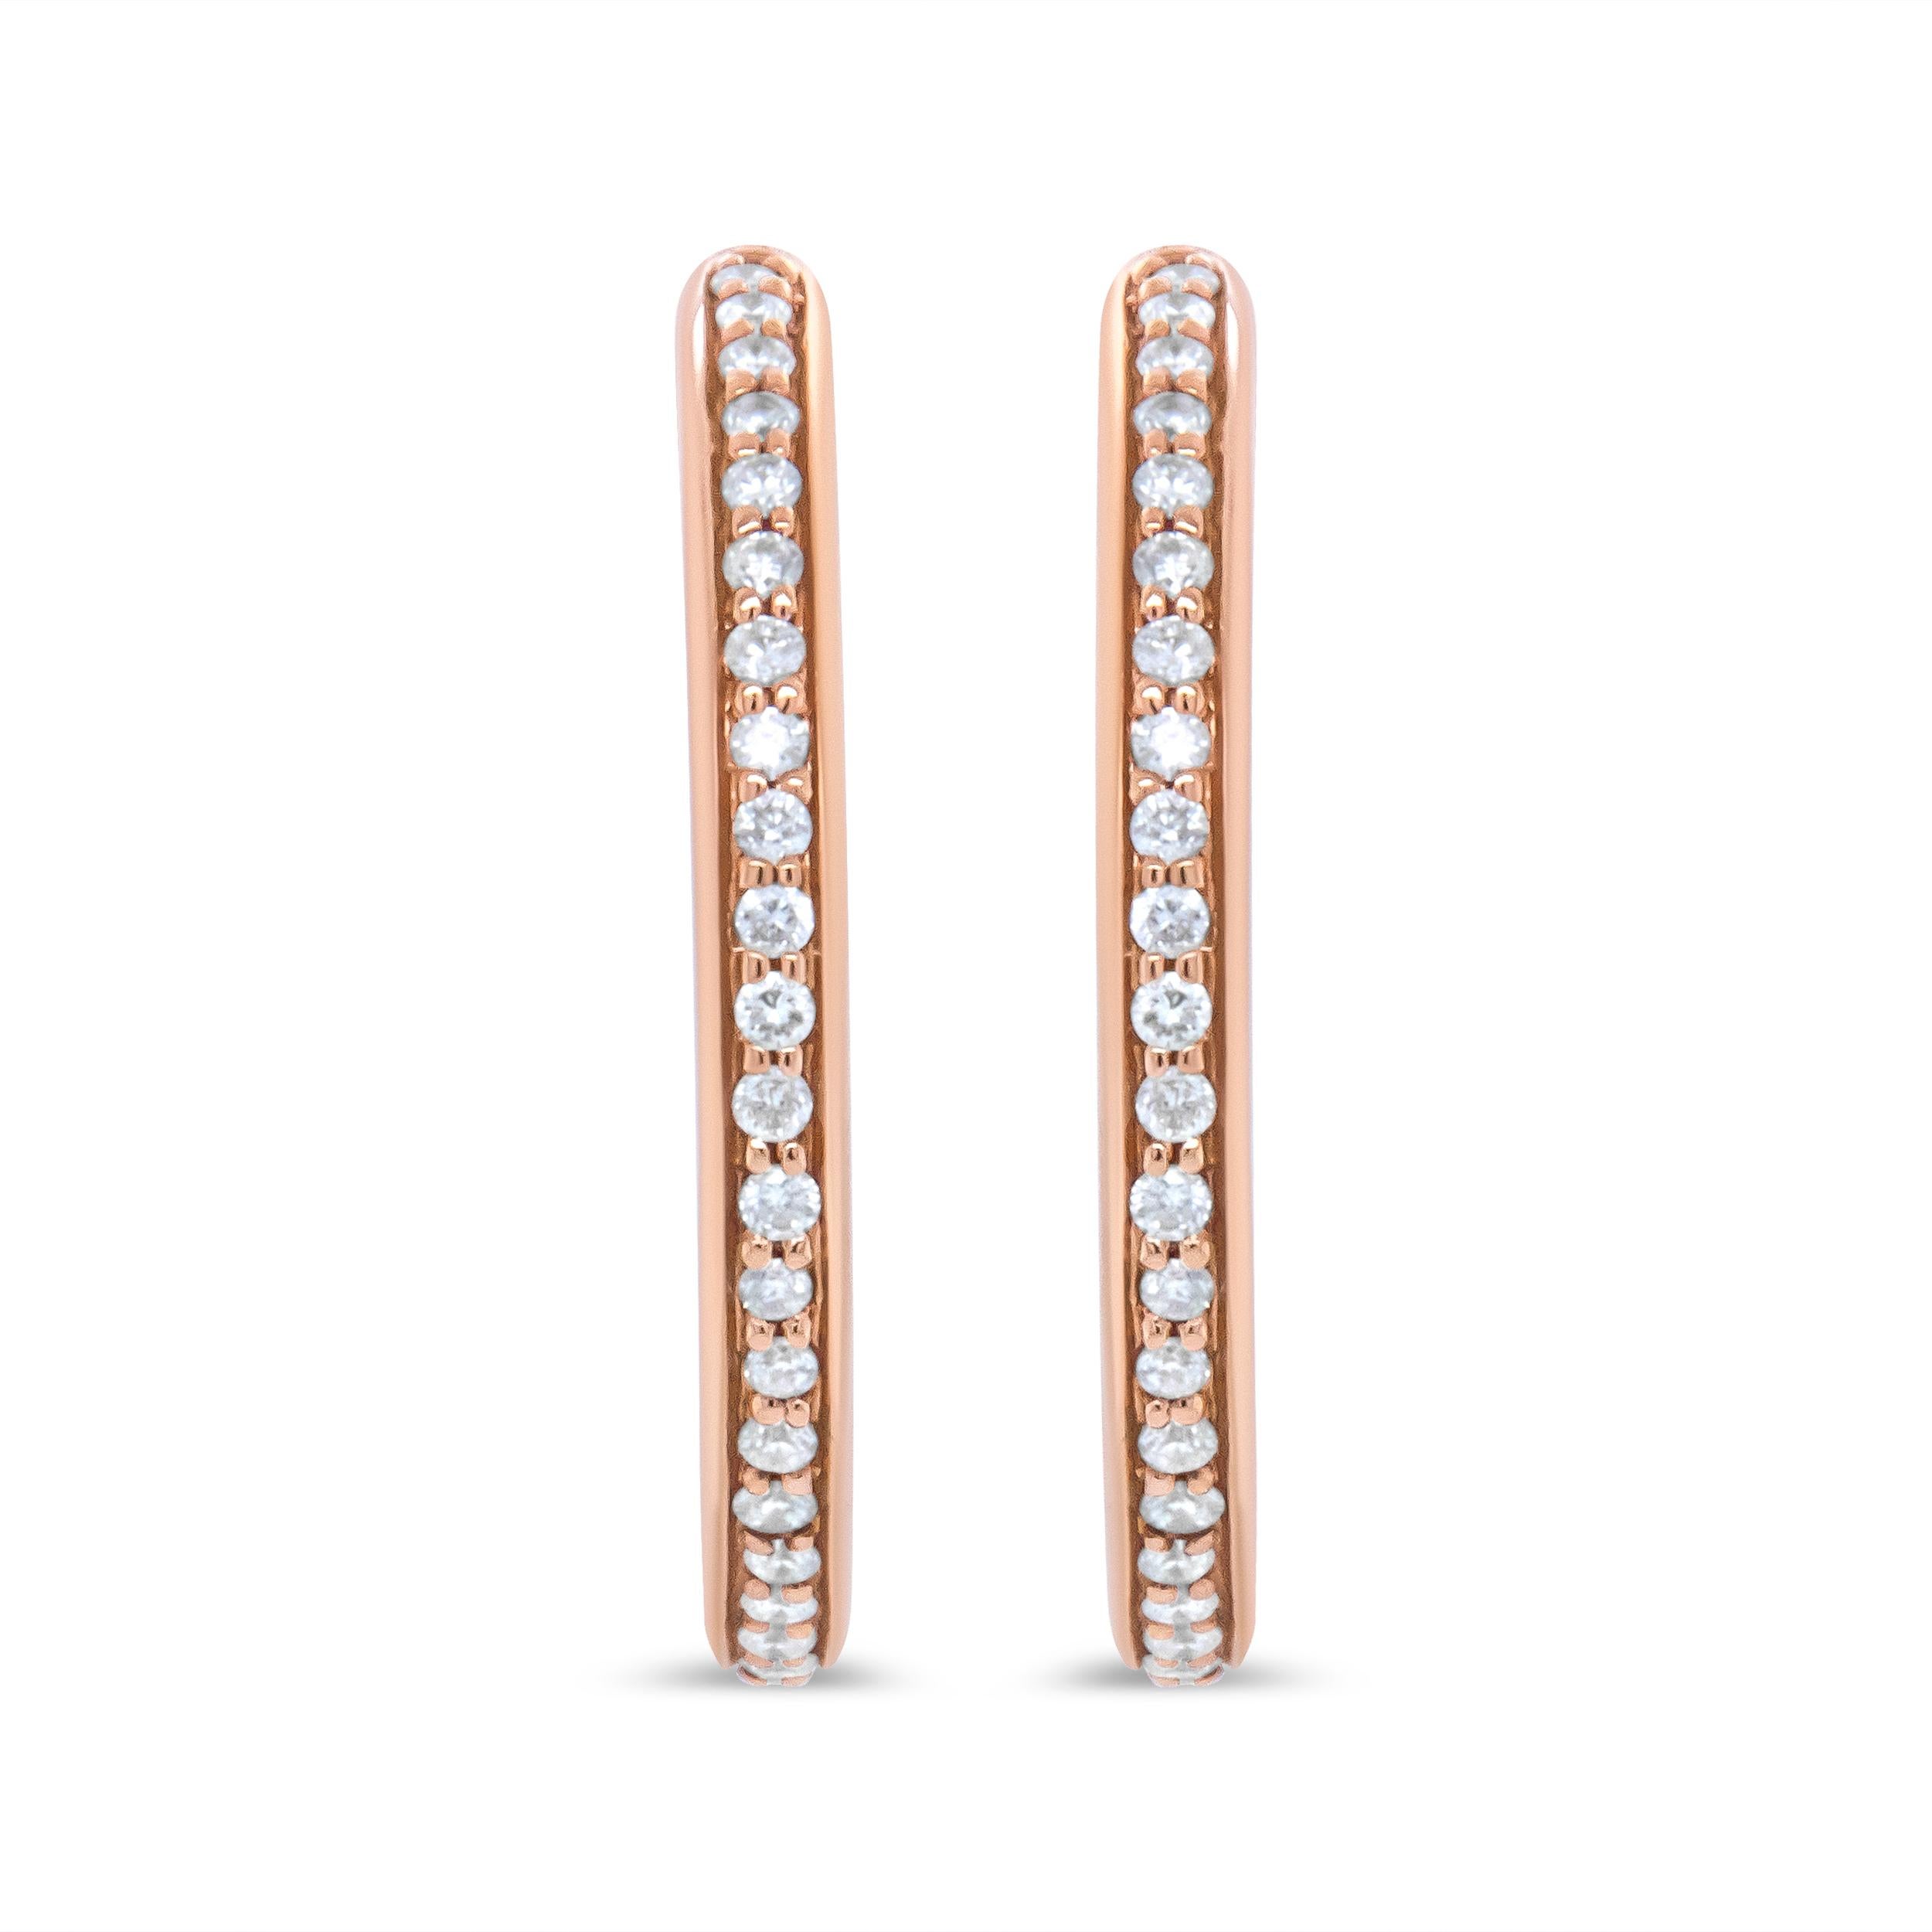 These classic hoops are a true romantic in genuine 18k rose gold with a total 1/5 cttw with an approximate F-G Color and VS1-VS2 Clarity. Each earring features a row of round, prong-set diamonds that flash a dazzling sparkle from your ears. These